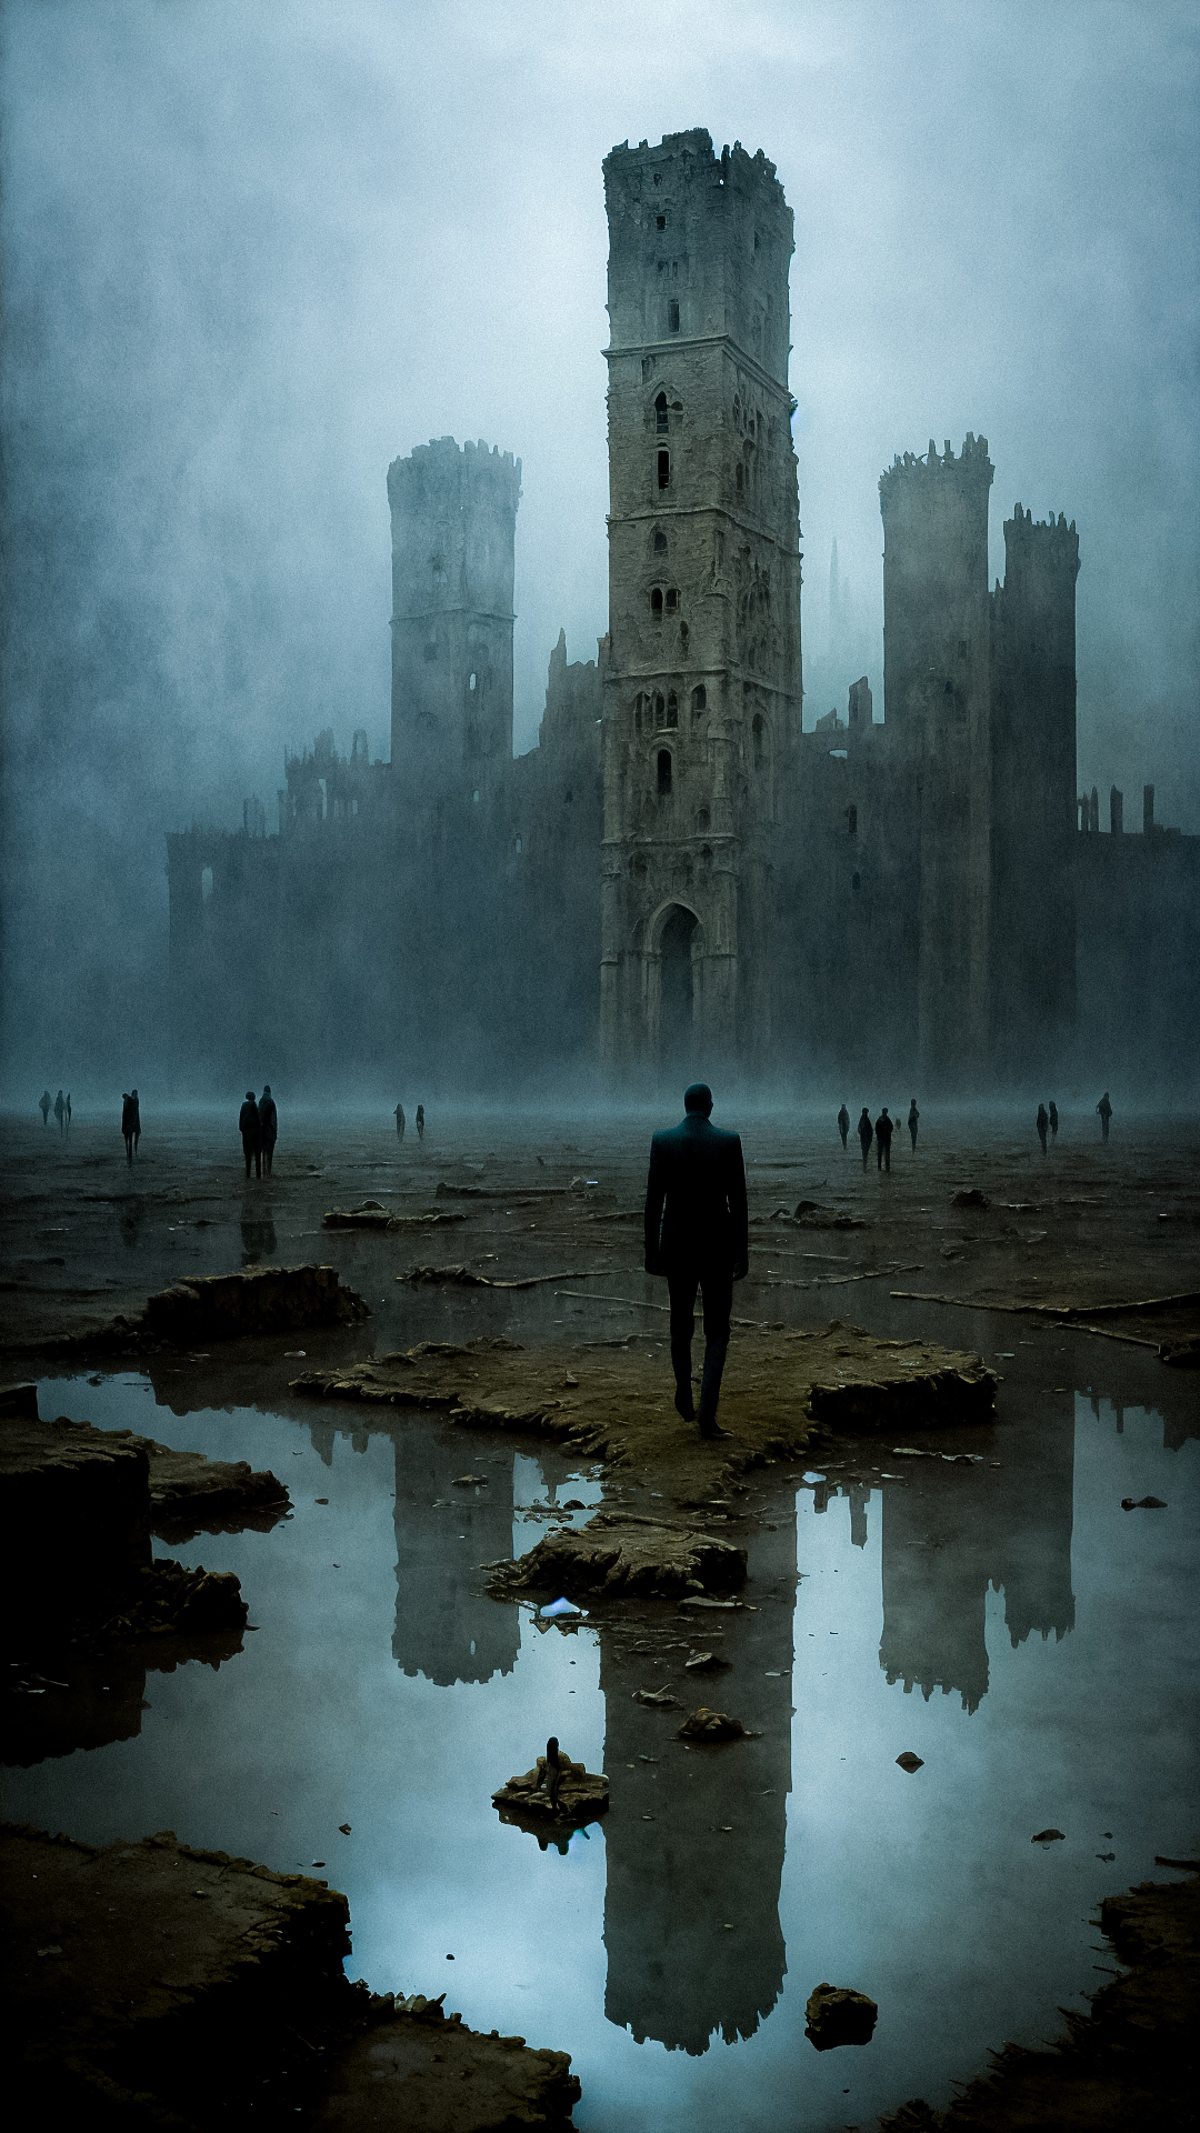 The image features a man in a suit standing in a desolate area, surrounded by ruins and a castle-like structure. He appears to be looking at the camera, while the rest of the scene is foggy and haunting. The man's suit and tie give off a formal and mysterious vibe, as he stands near a puddle in the scene. The overall atmosphere suggests a sense of solitude and exploration amidst the ruins, possibly evoking feelings of curiosity and wonder.